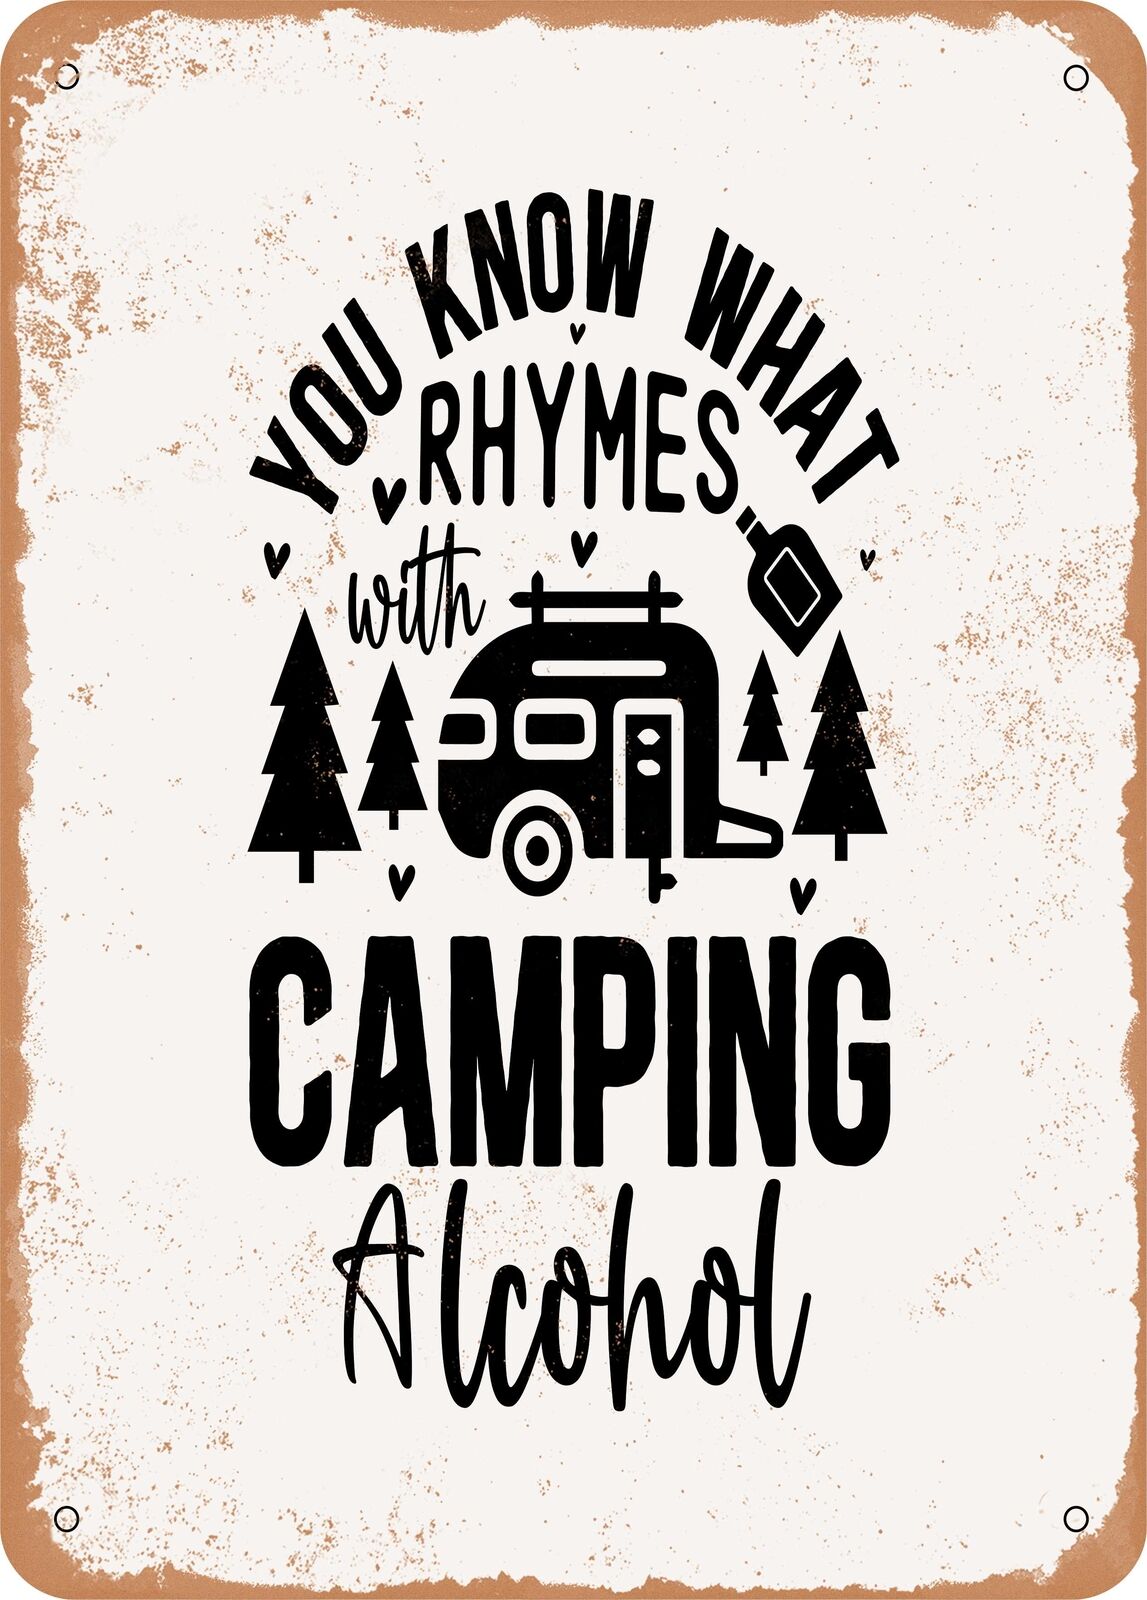 Metal Sign - You Know What Rhymes With Camping Alcohol - Vintage Rusty Look